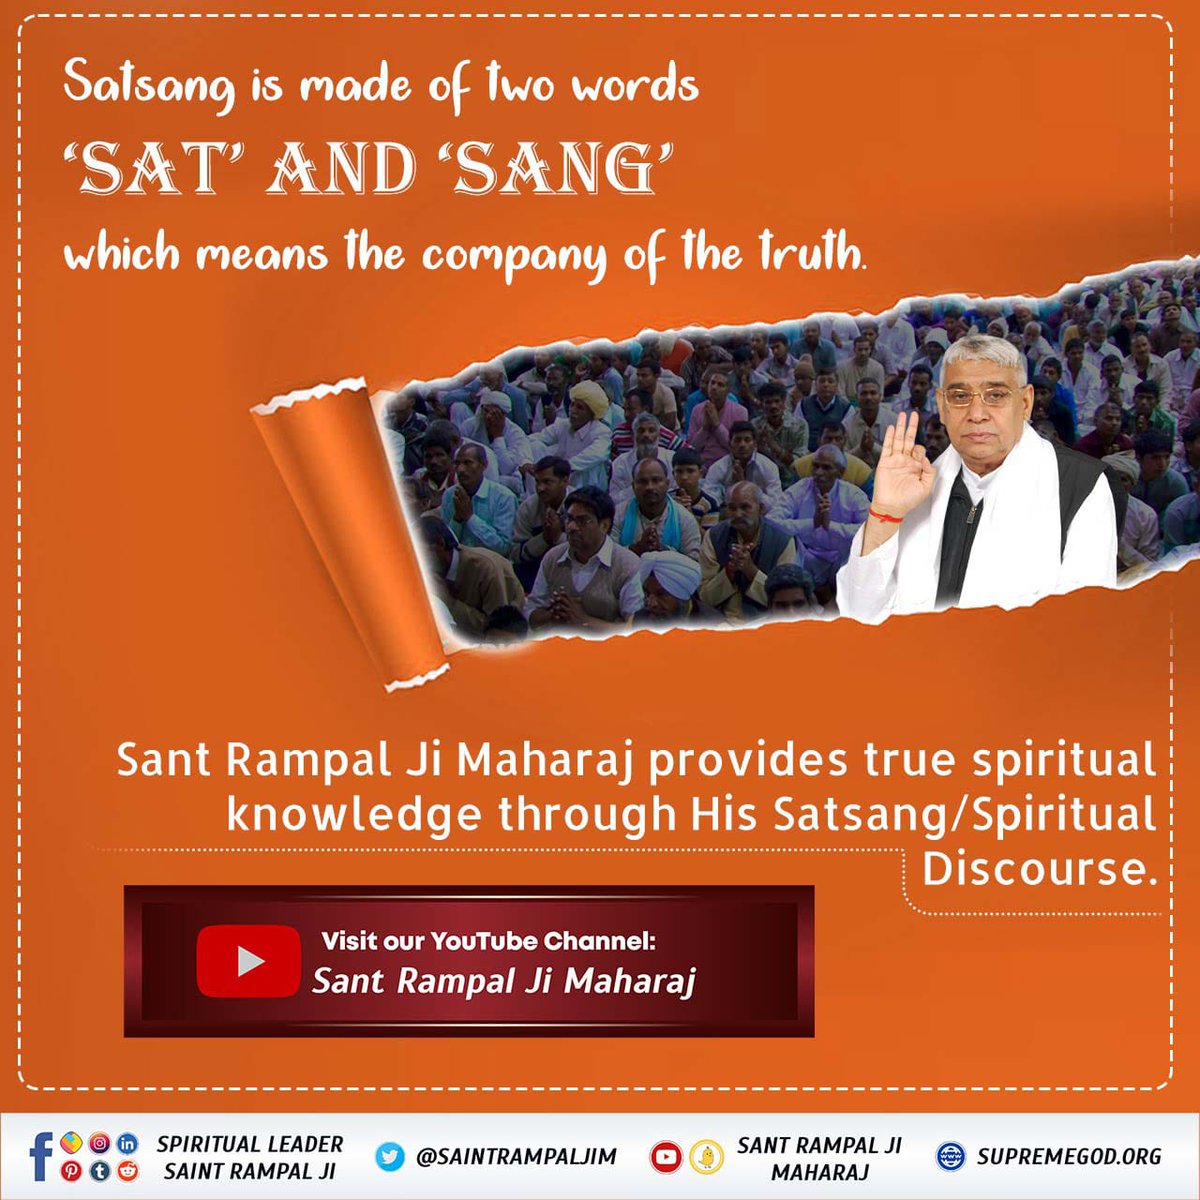 #GodNightThursday 
Satsang is made of two words 'SAT 'And SANG 'which means the company of the truth. 
SantRampalJiMaharaj provides true spiritual knowledge through his Satsang spiritual /discourse.

Must Visit - Sant Rampal Ji Maharaj YouTube Channel for More Information